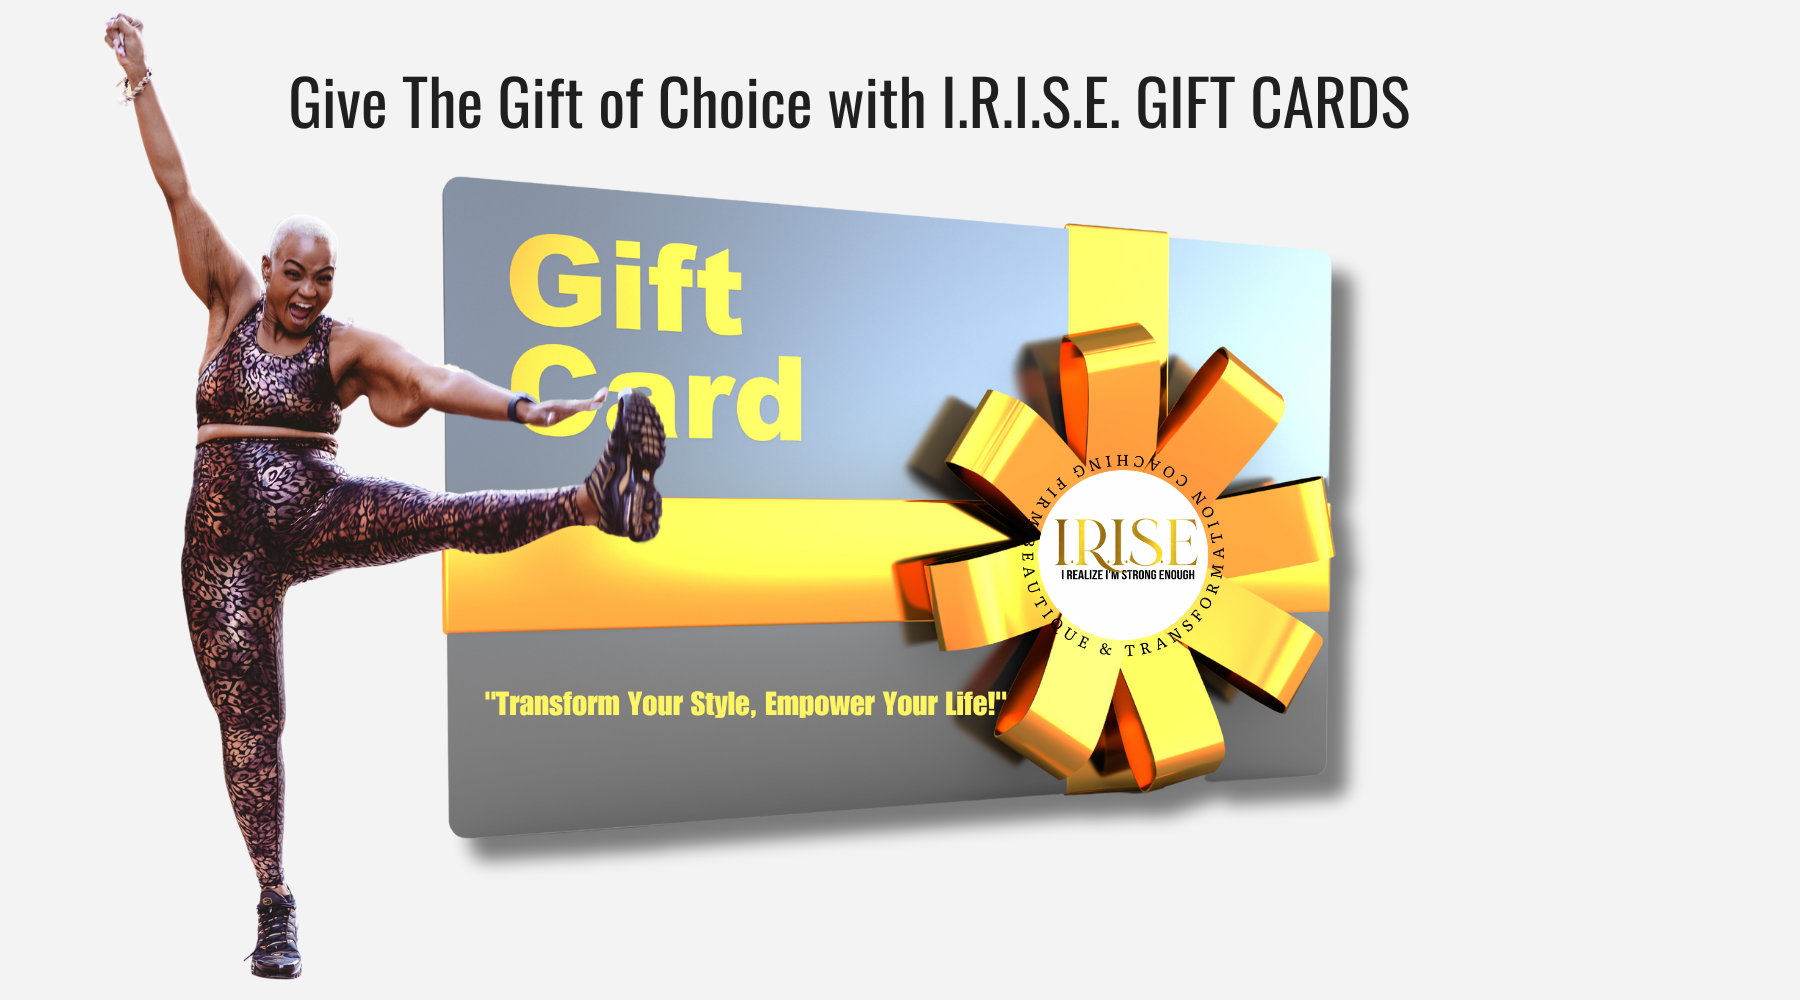 Give the Gift of Choice: I.R.IS.E. Beautique Gift Cards